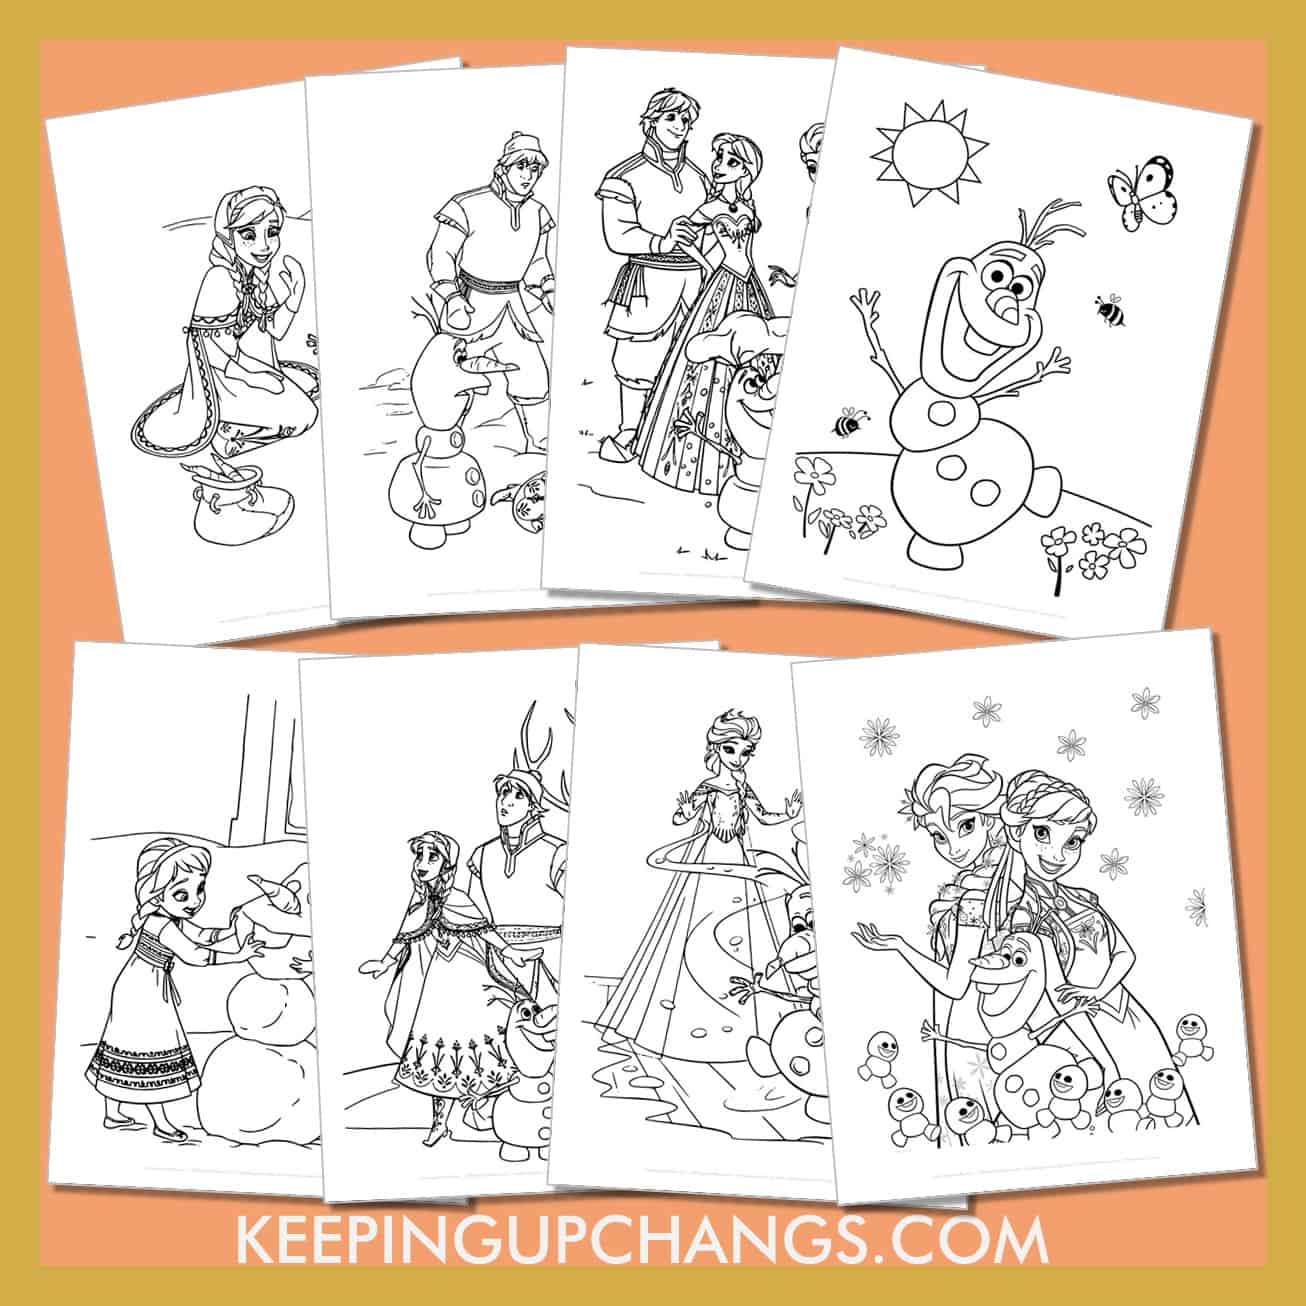 free olaf frozen pictures to color for toddlers, kids, adults.